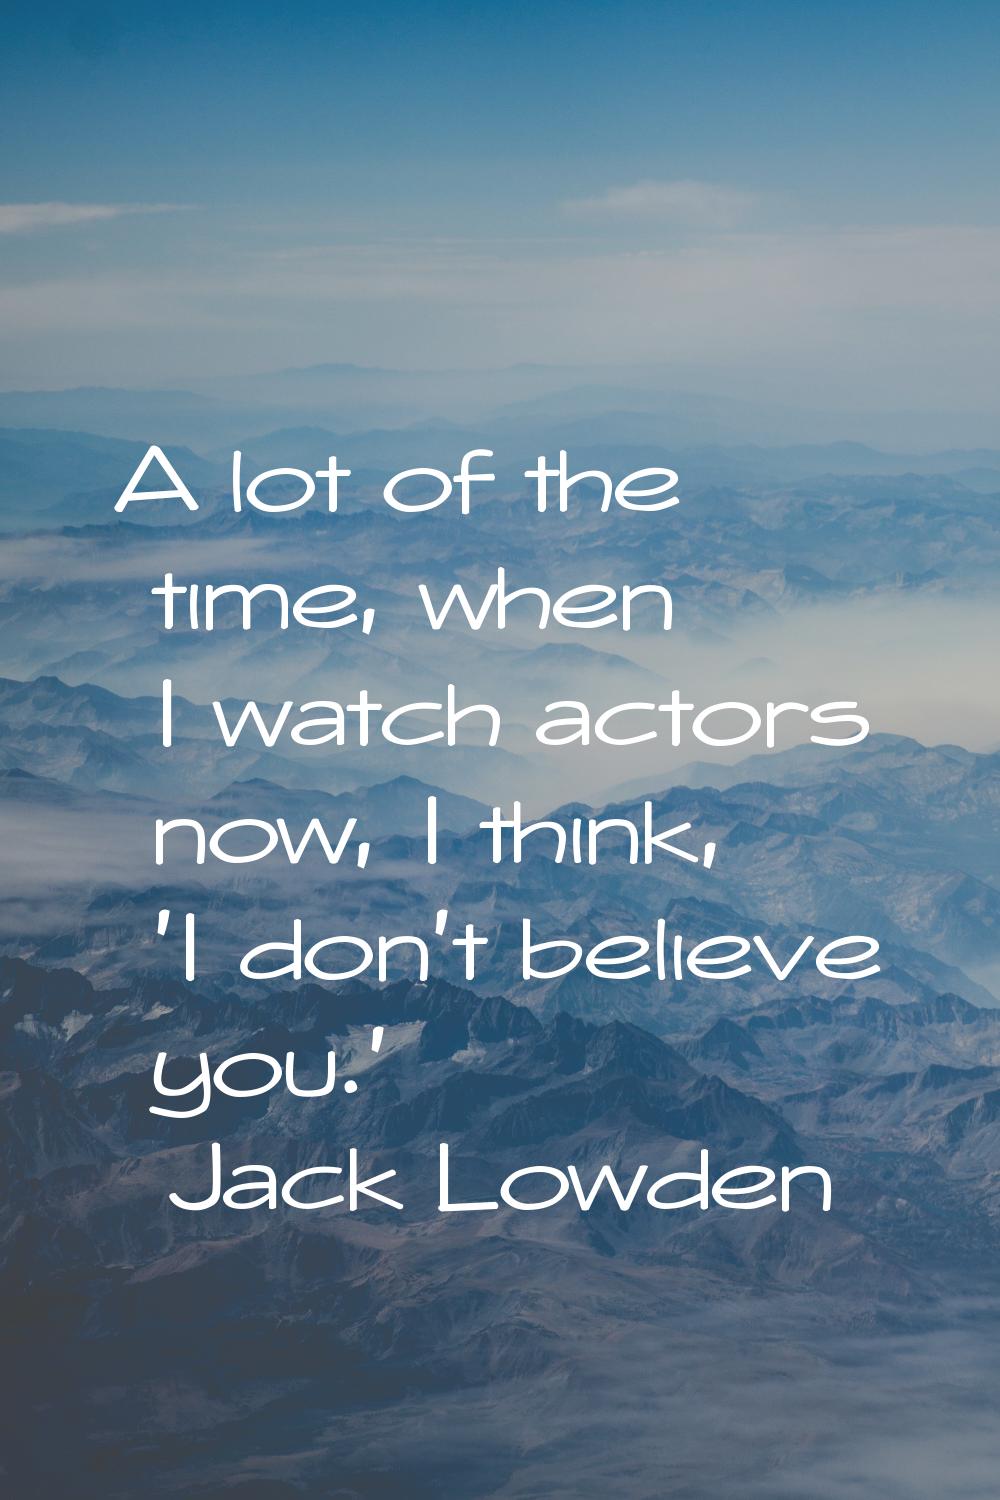 A lot of the time, when I watch actors now, I think, 'I don't believe you.'